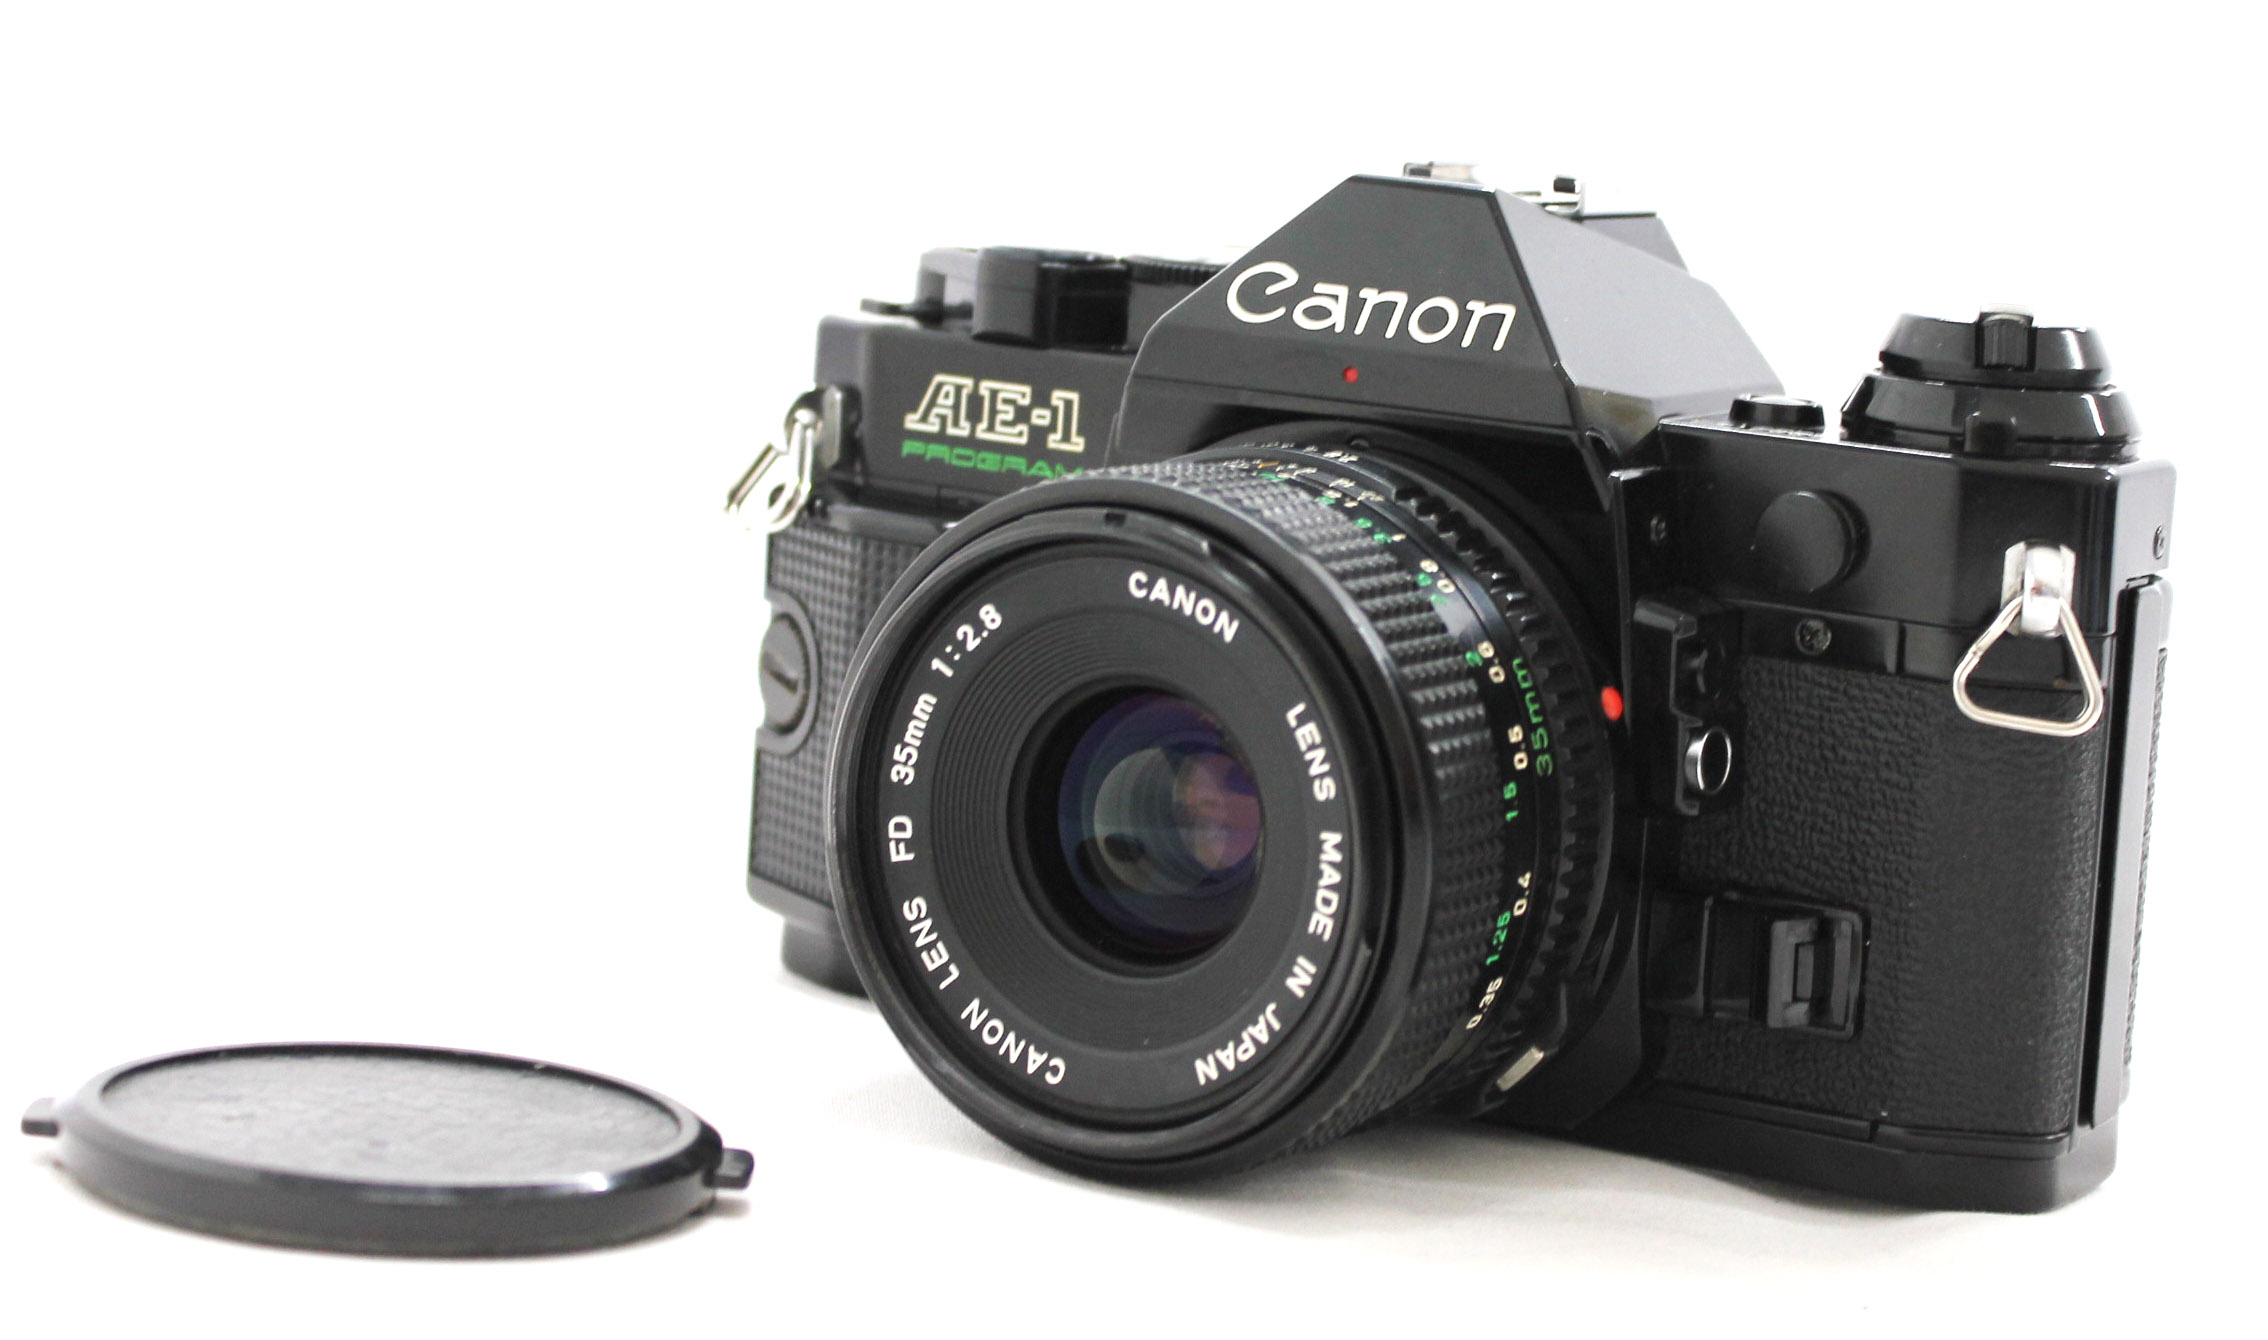 Japan Used Camera Shop | Canon AE-1 Program 35mm SLR Film Camera Black with New FD 35mm F/2.8 Lens from Japan